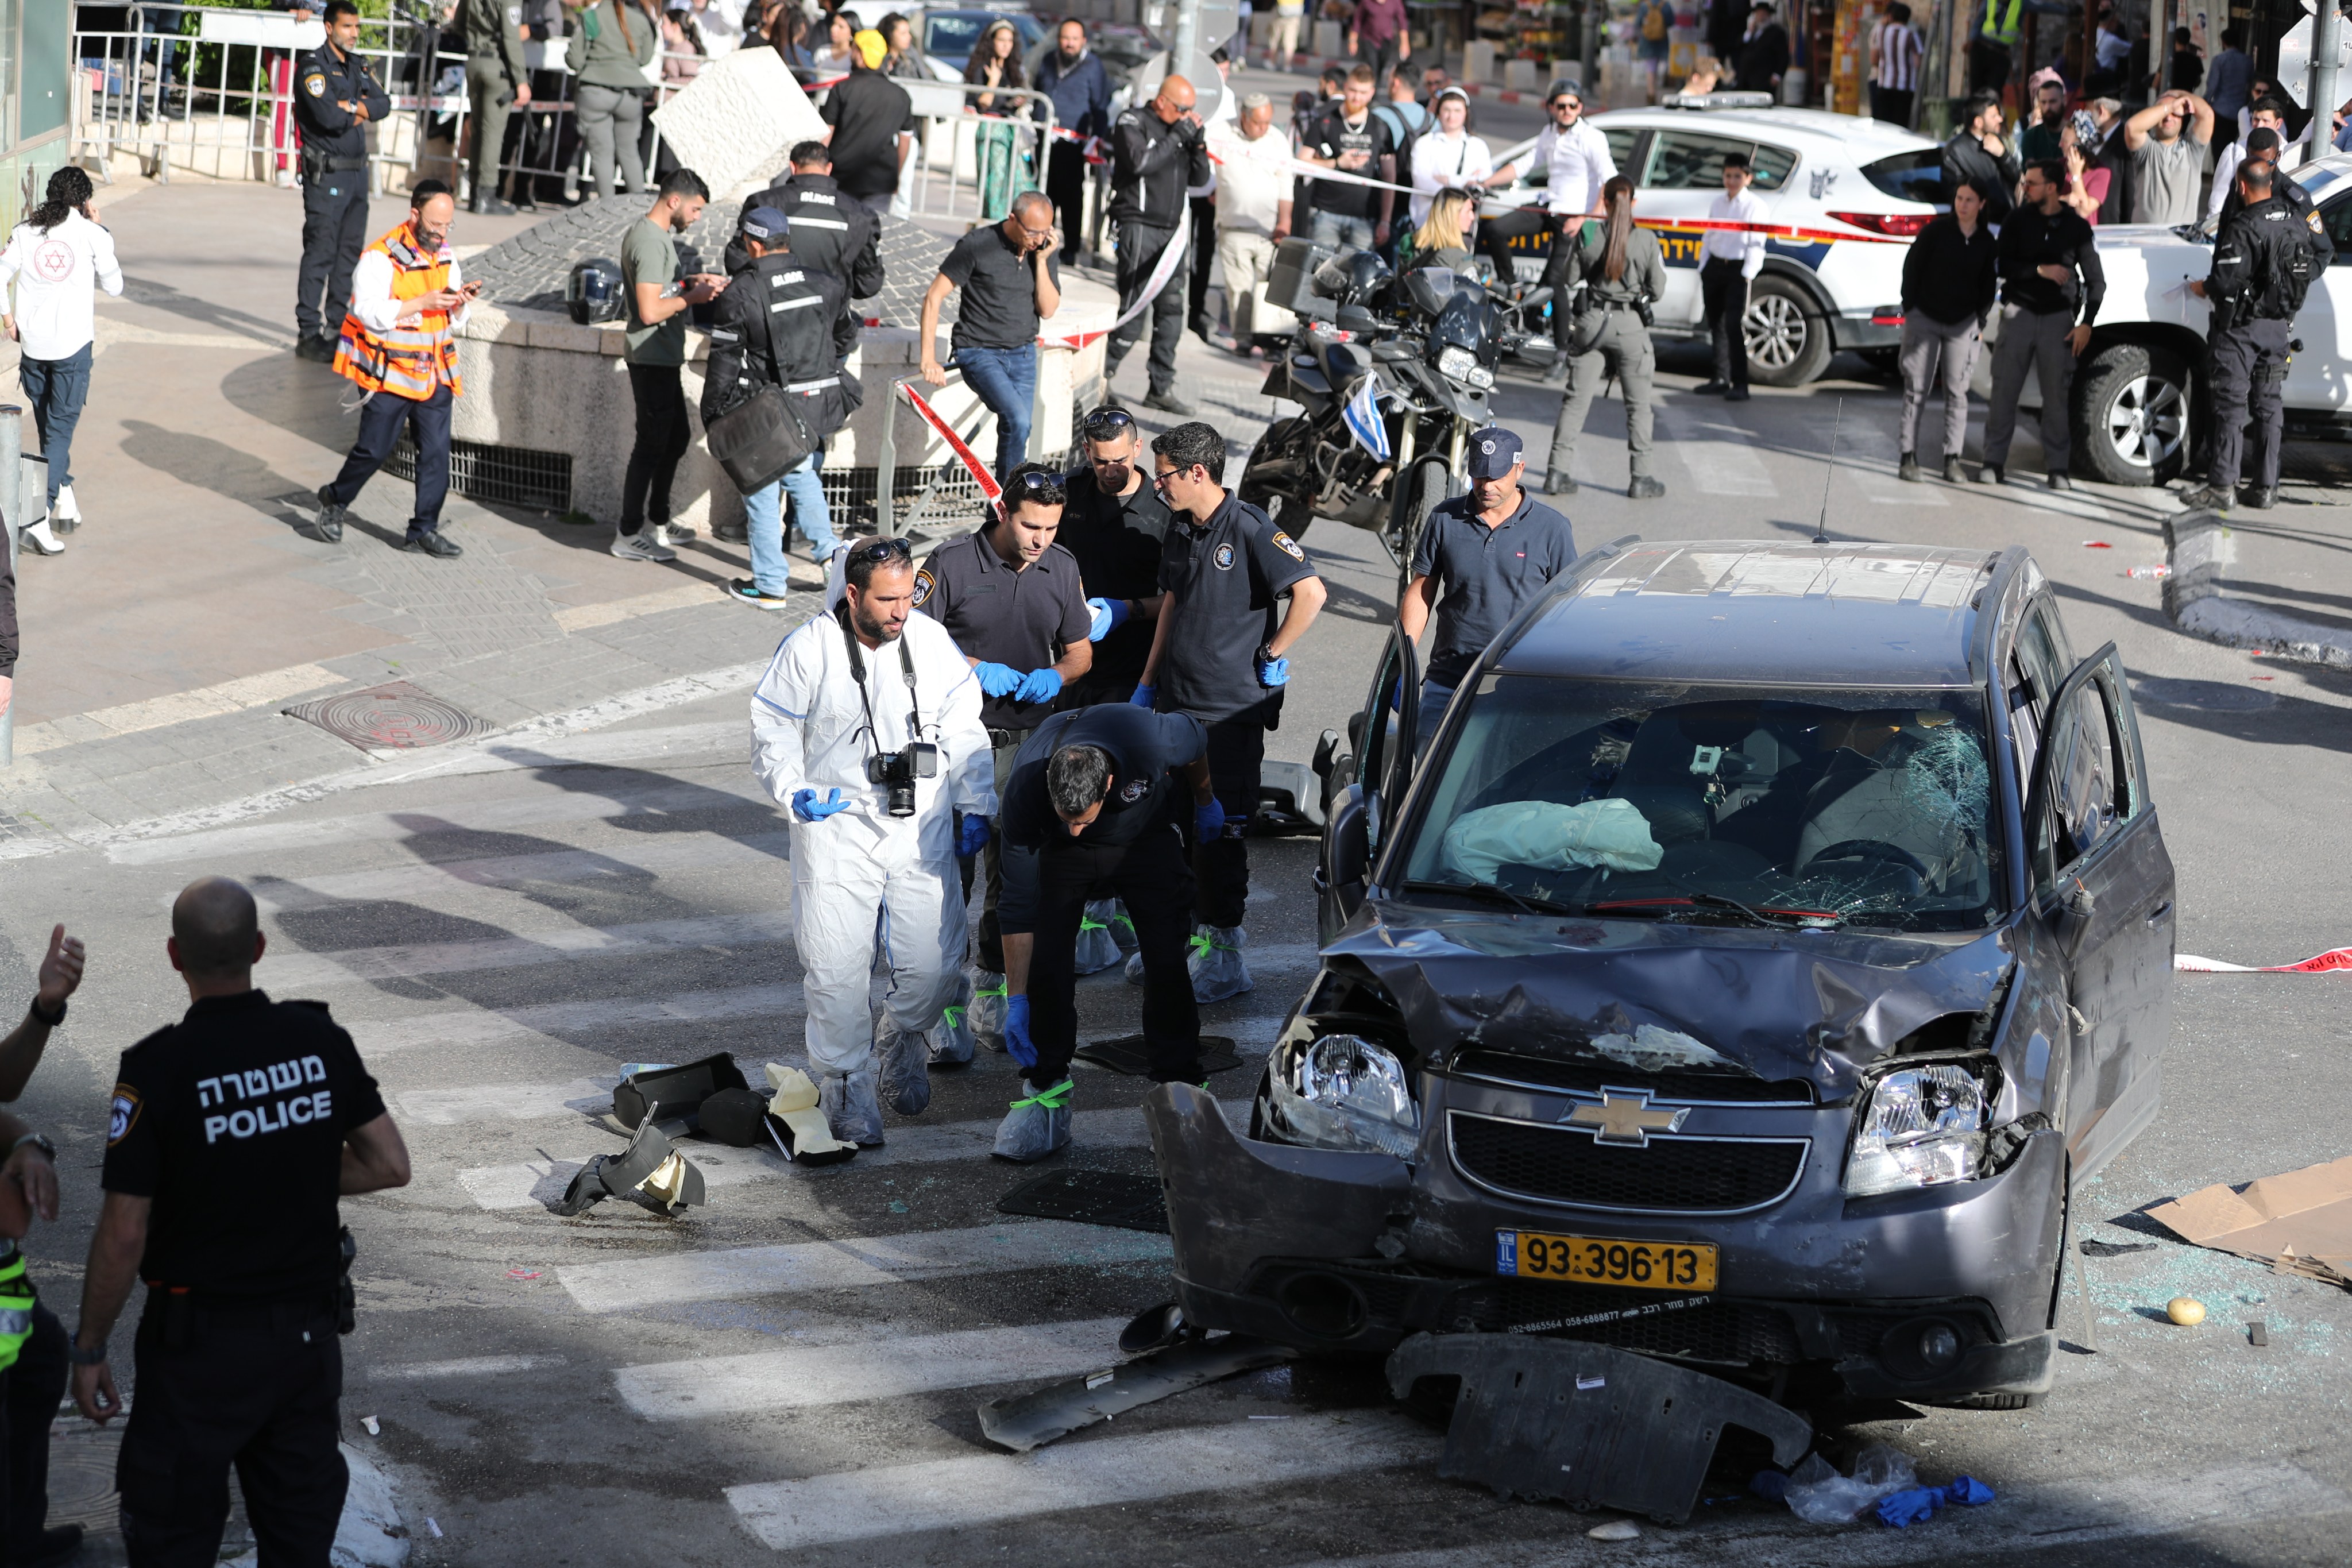 Police work at the scene where a car rammed into a crowd in Jerusalem on Friday. Photo: Xinhua